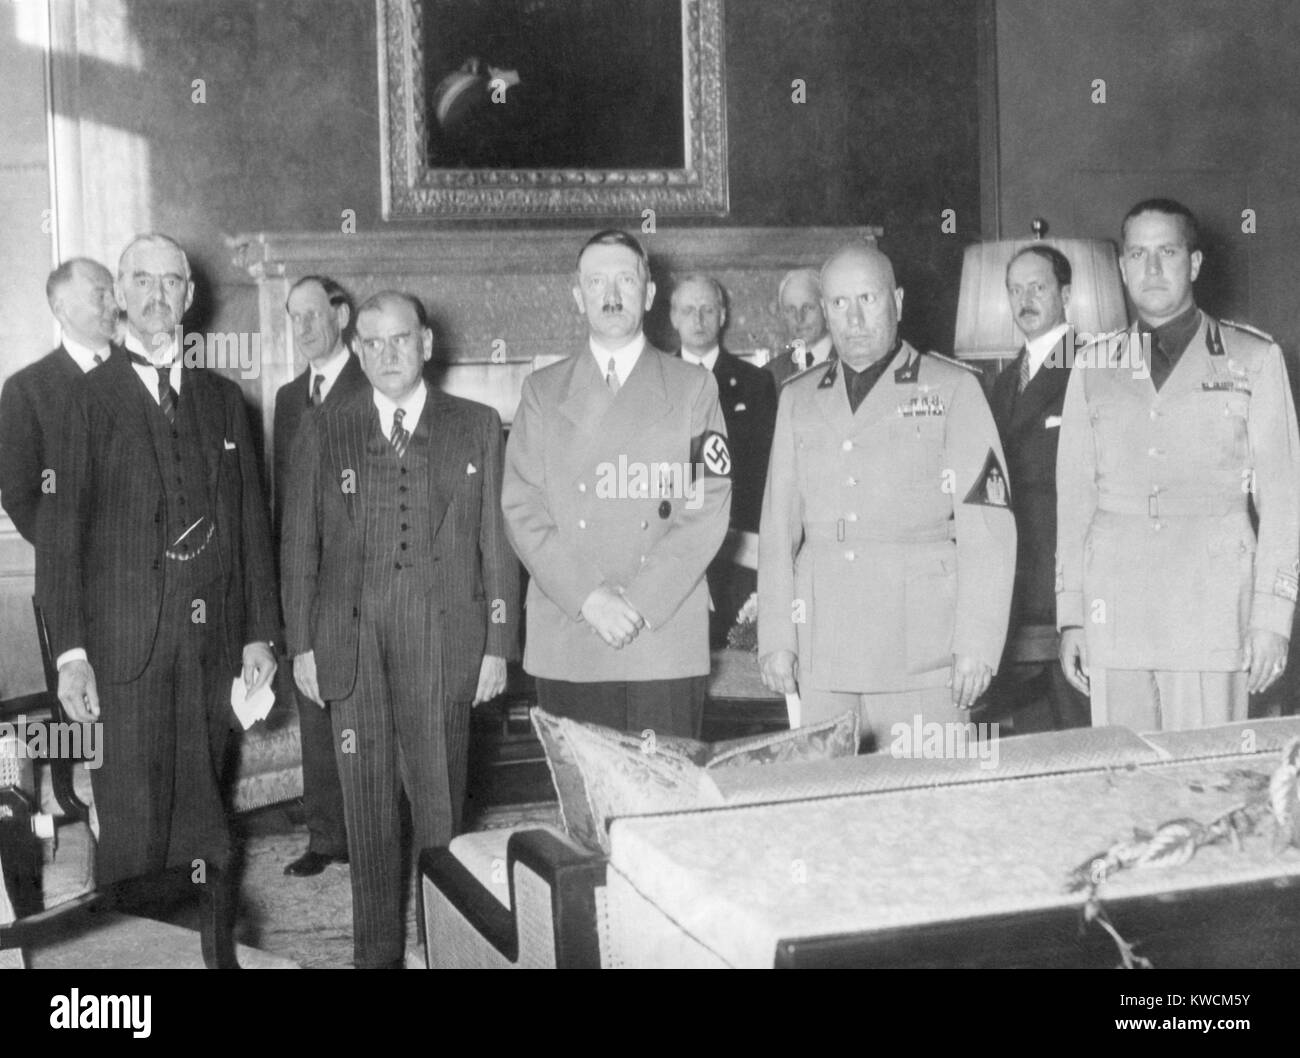 The Munich Conference that ceded the Czech Sudetenland to Germany. Chamberlain, Daladier, Hitler, Mussolini, and Ciano are pictured before the signing. Sept. 30, 1938. - (BSLOC 2014 14 11) Stock Photo